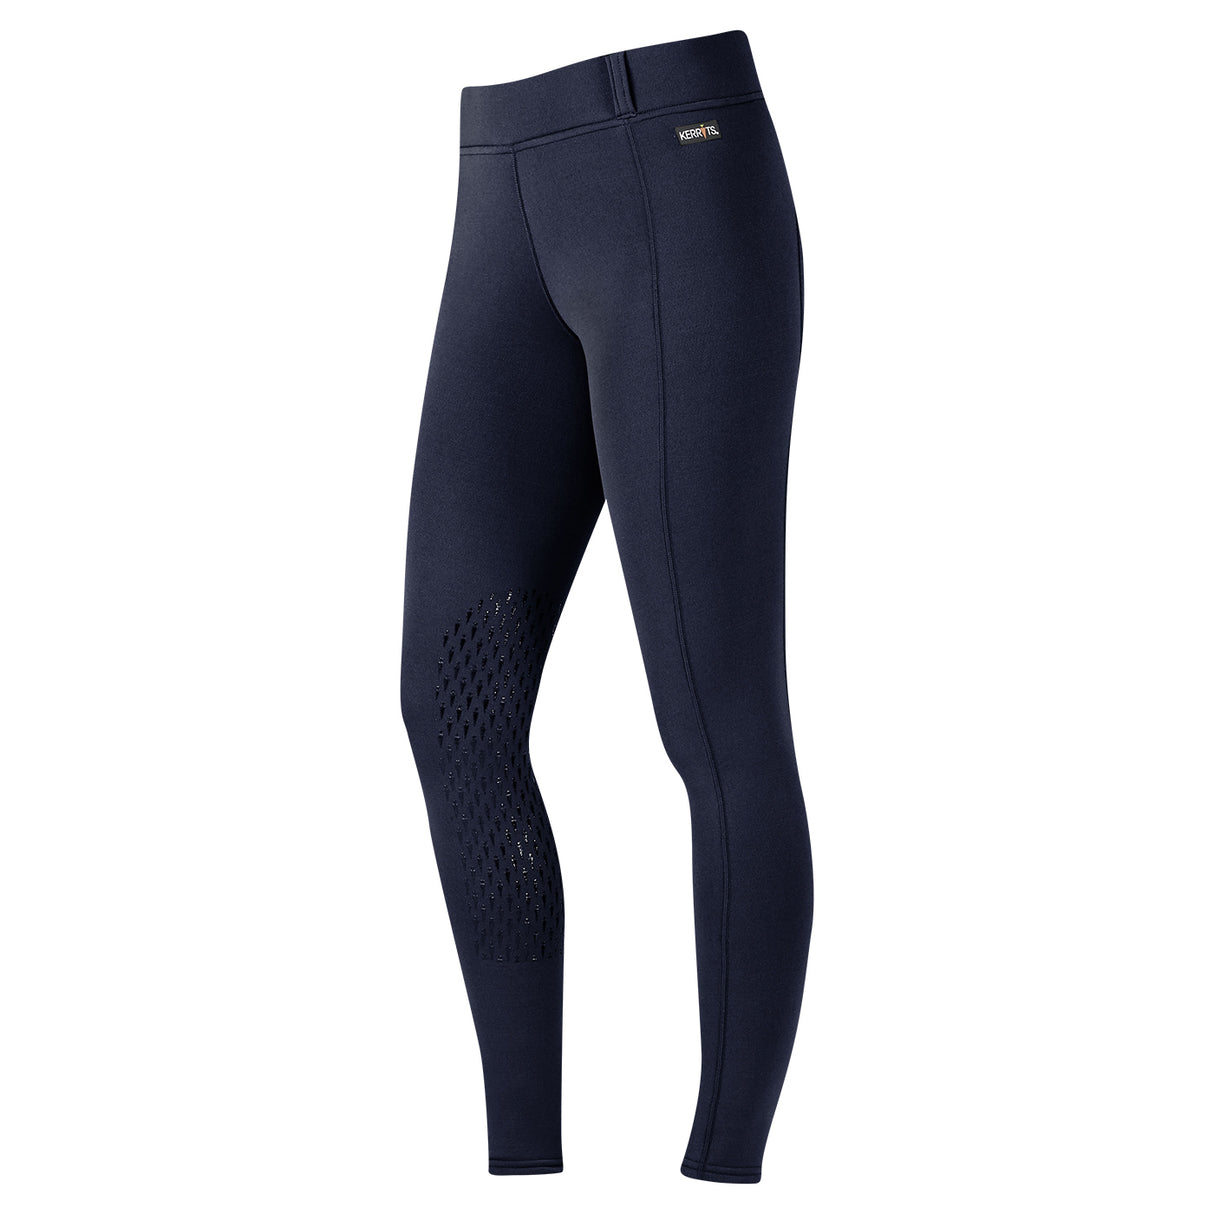 Thermo Tech™ 2.0 Full Leg Tight  Equestrian outfits, Riding tights, Tights